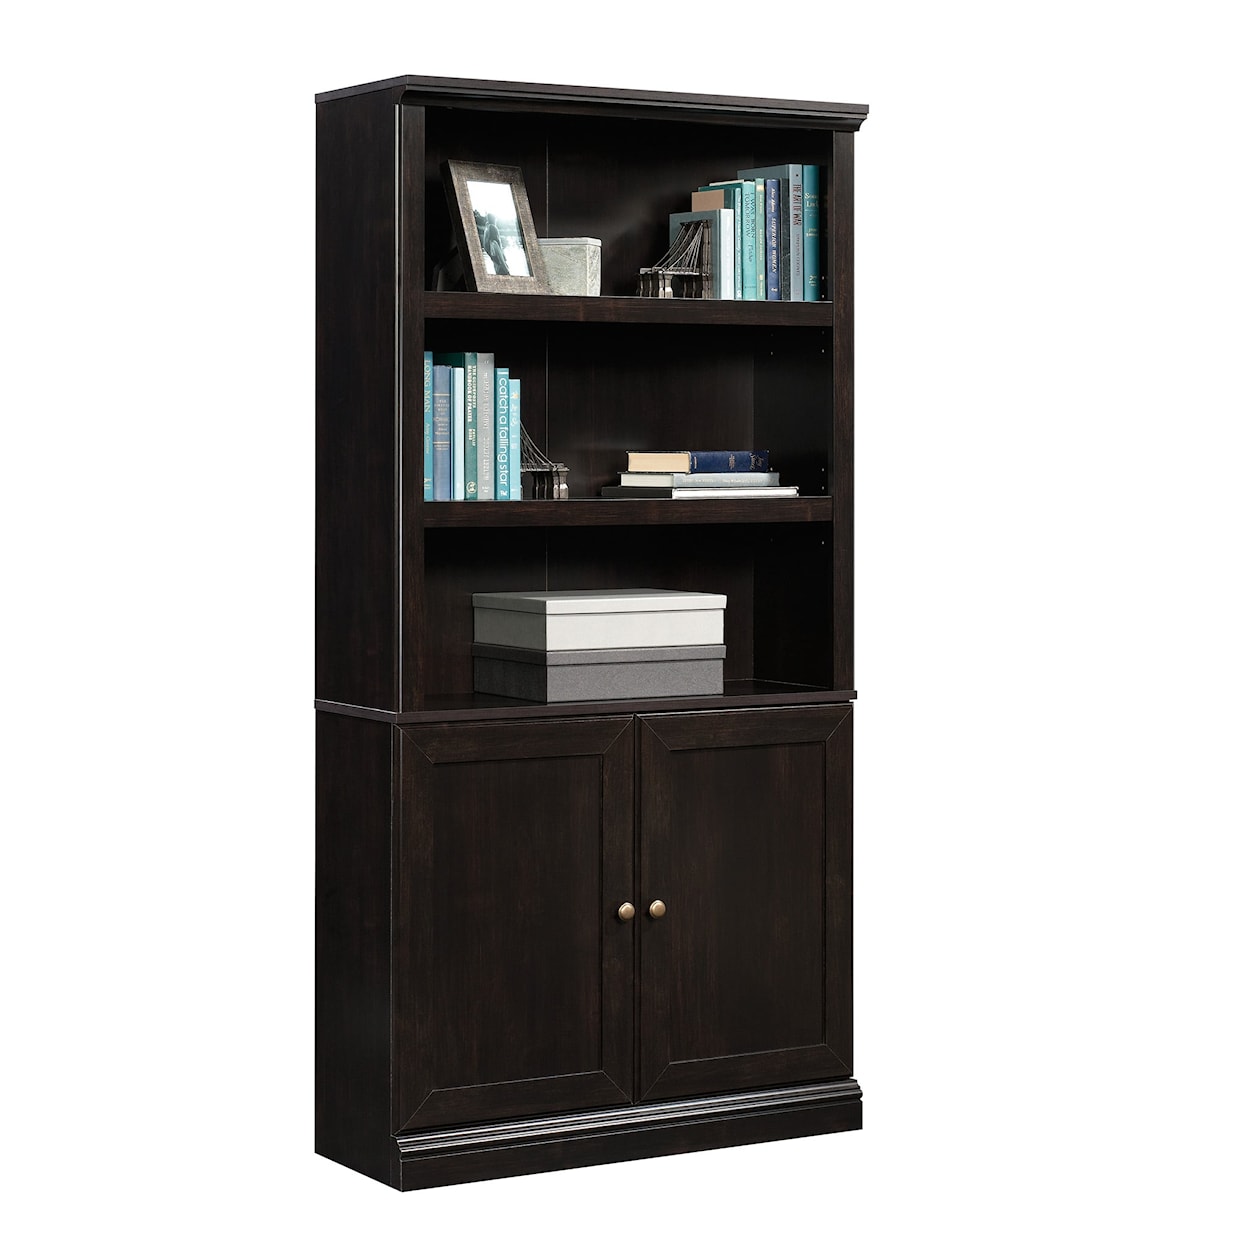 Sauder Miscellaneous Storage Bookcase with Doors